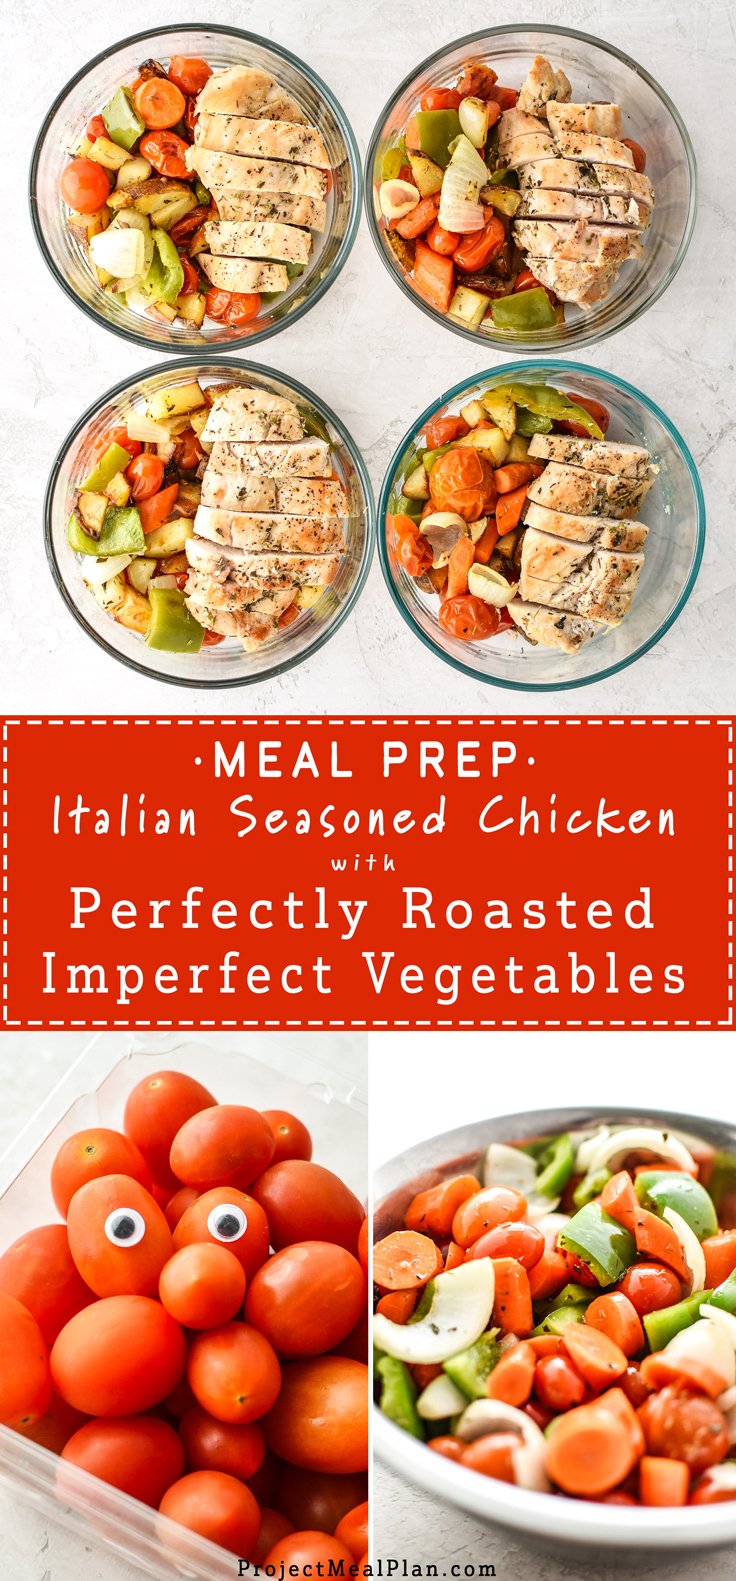 Meal Prep Italian Seasoned Chicken with Roasted Imperfect Vegetables - Simple, healthy, easy italian seasoned chicken with very Imperfect oven roasted potatoes, peppers, cherry tomatoes, carrots, and onions! - ProjectMealPlan.com